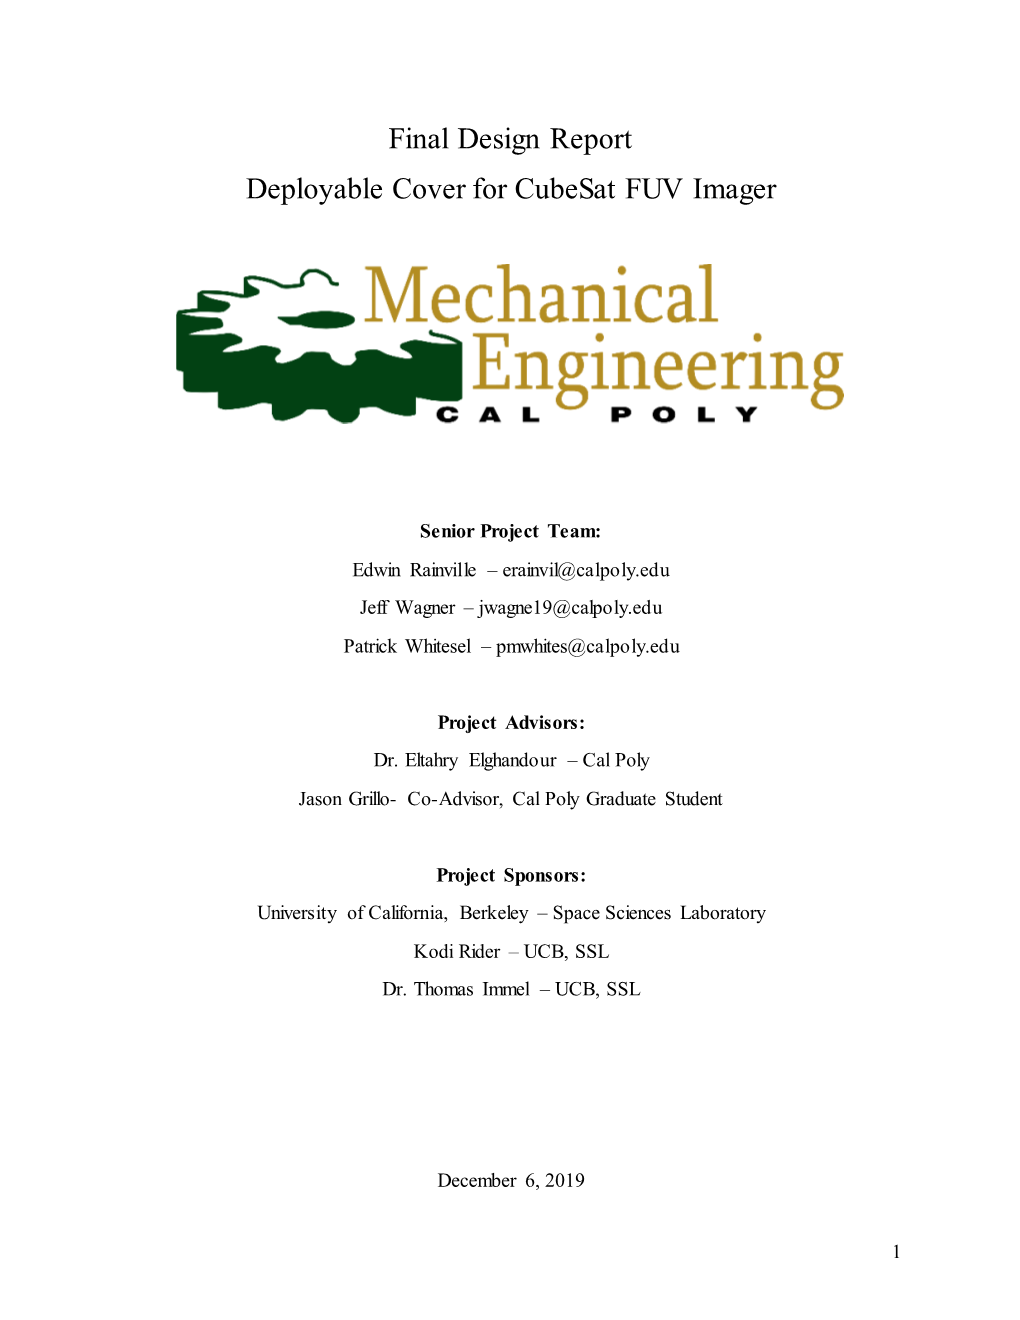 Final Design Report Deployable Cover for Cubesat FUV Imager